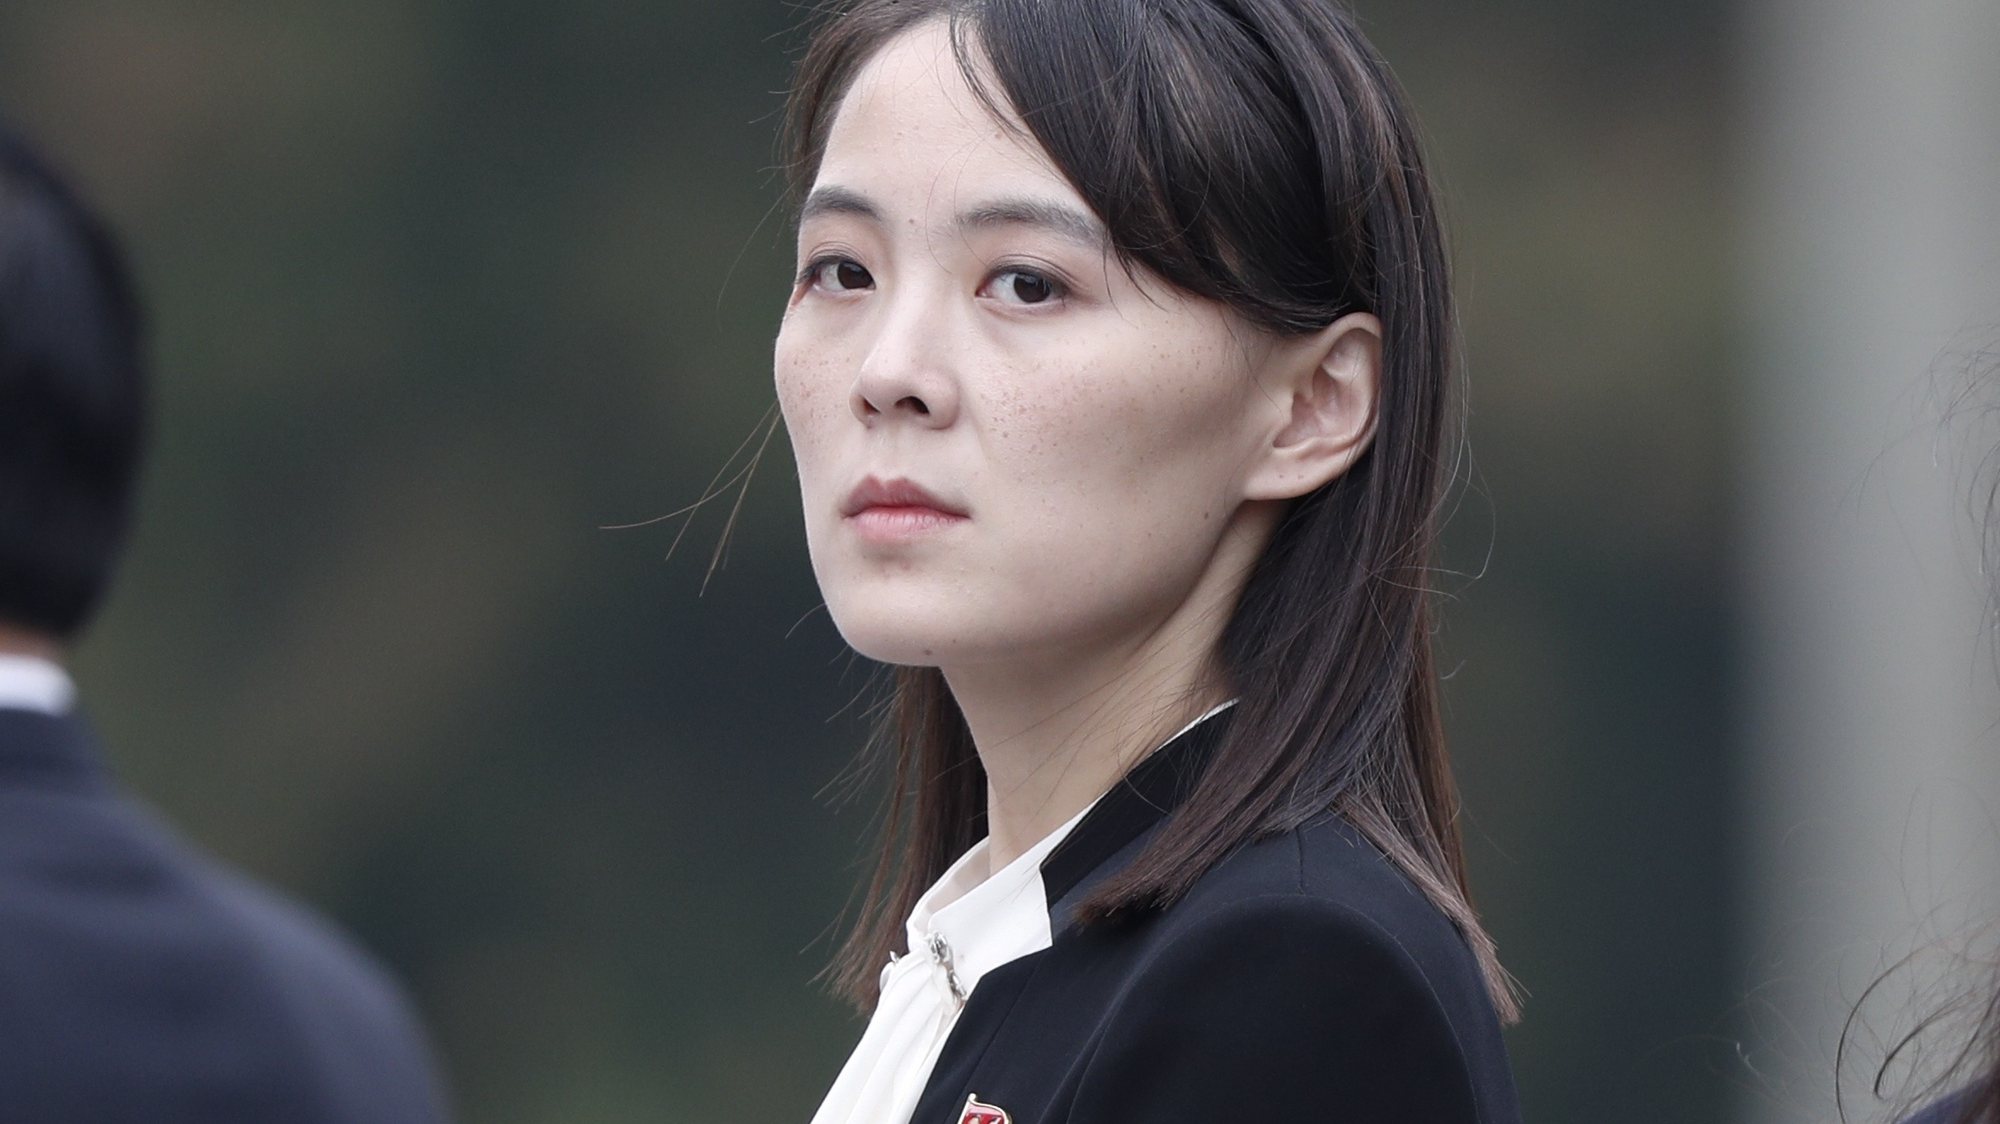 epa09077282 (FILE) - Kim Yo-jong, sister of North Korea&#039;s leader Kim Jong-un, attends wreath laying ceremony at the Ho Chi Minh Mausoleum in Hanoi, Vietnam, 02 March 2019 (reissued 16 March 2021). According to the North Korean state newspaper Rodong Sinmum, Kim Yo-jong, sister of North Korea&#039;s leader Kim Jong-un, reinterated North Korea&#039;s opposition to joint military excercises between the USA and South Korea.  EPA/JORGE SILVA / POOL